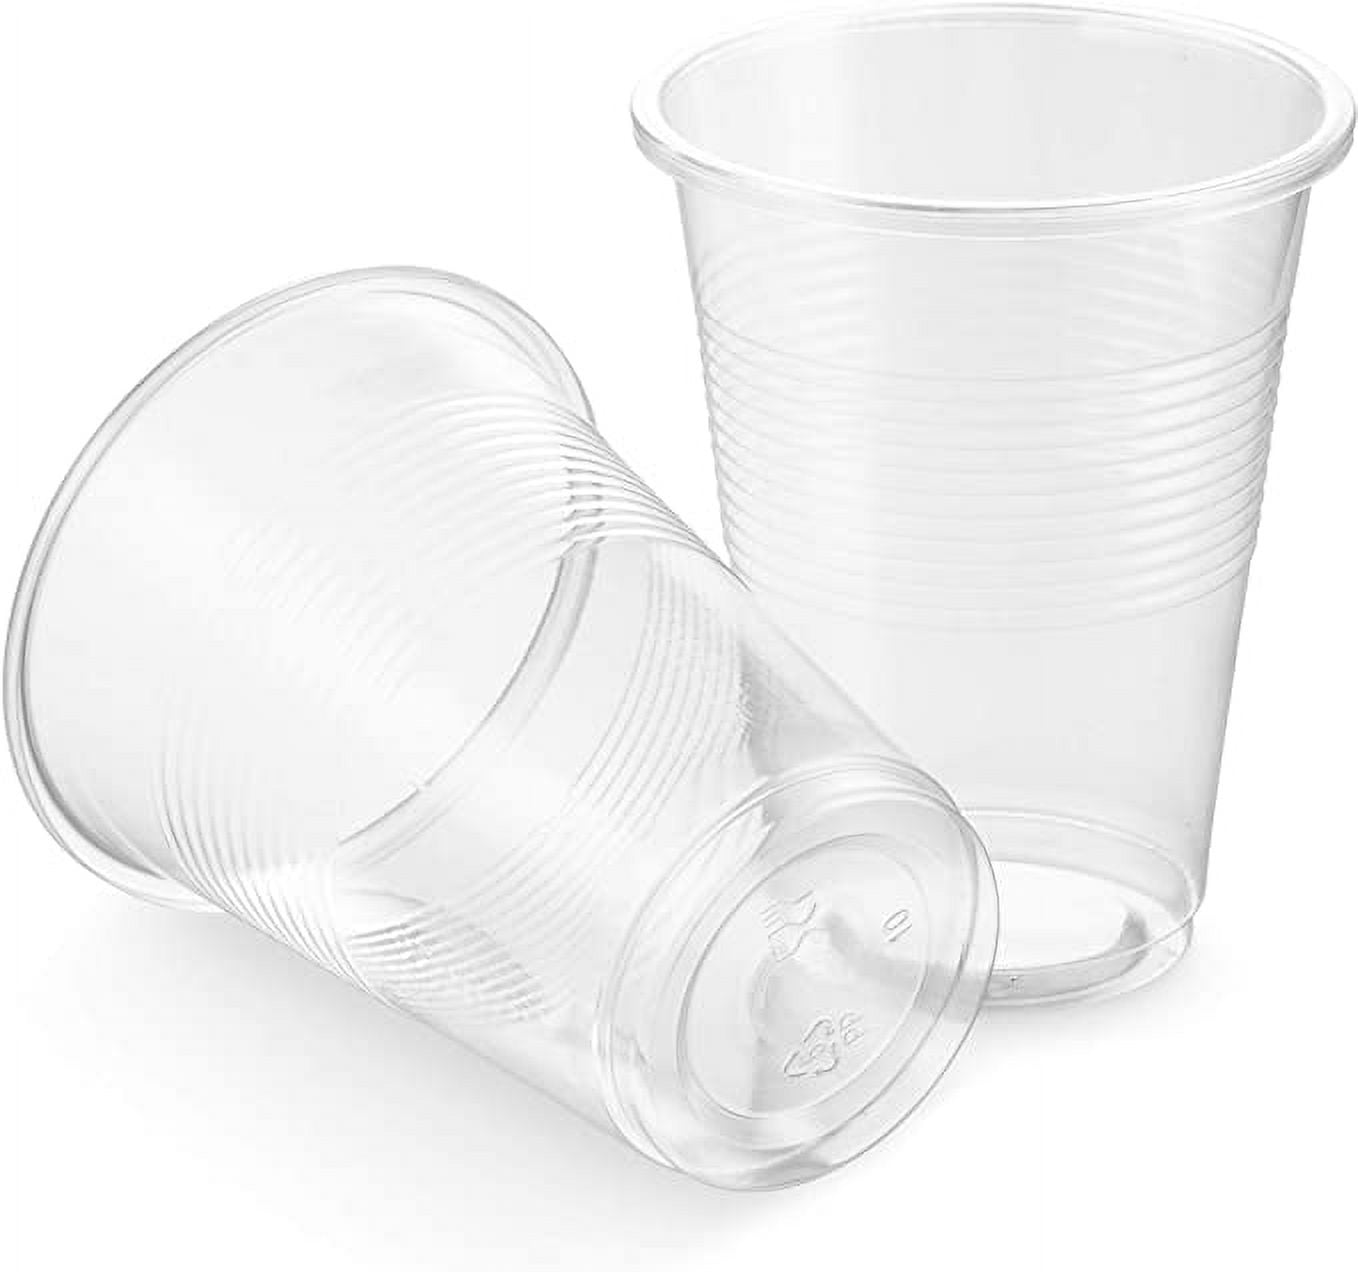 Chinet 782195849663 100 CT 9 OZ Cut Crystal Plastic Cold Cups, Count (Pack  of 1)